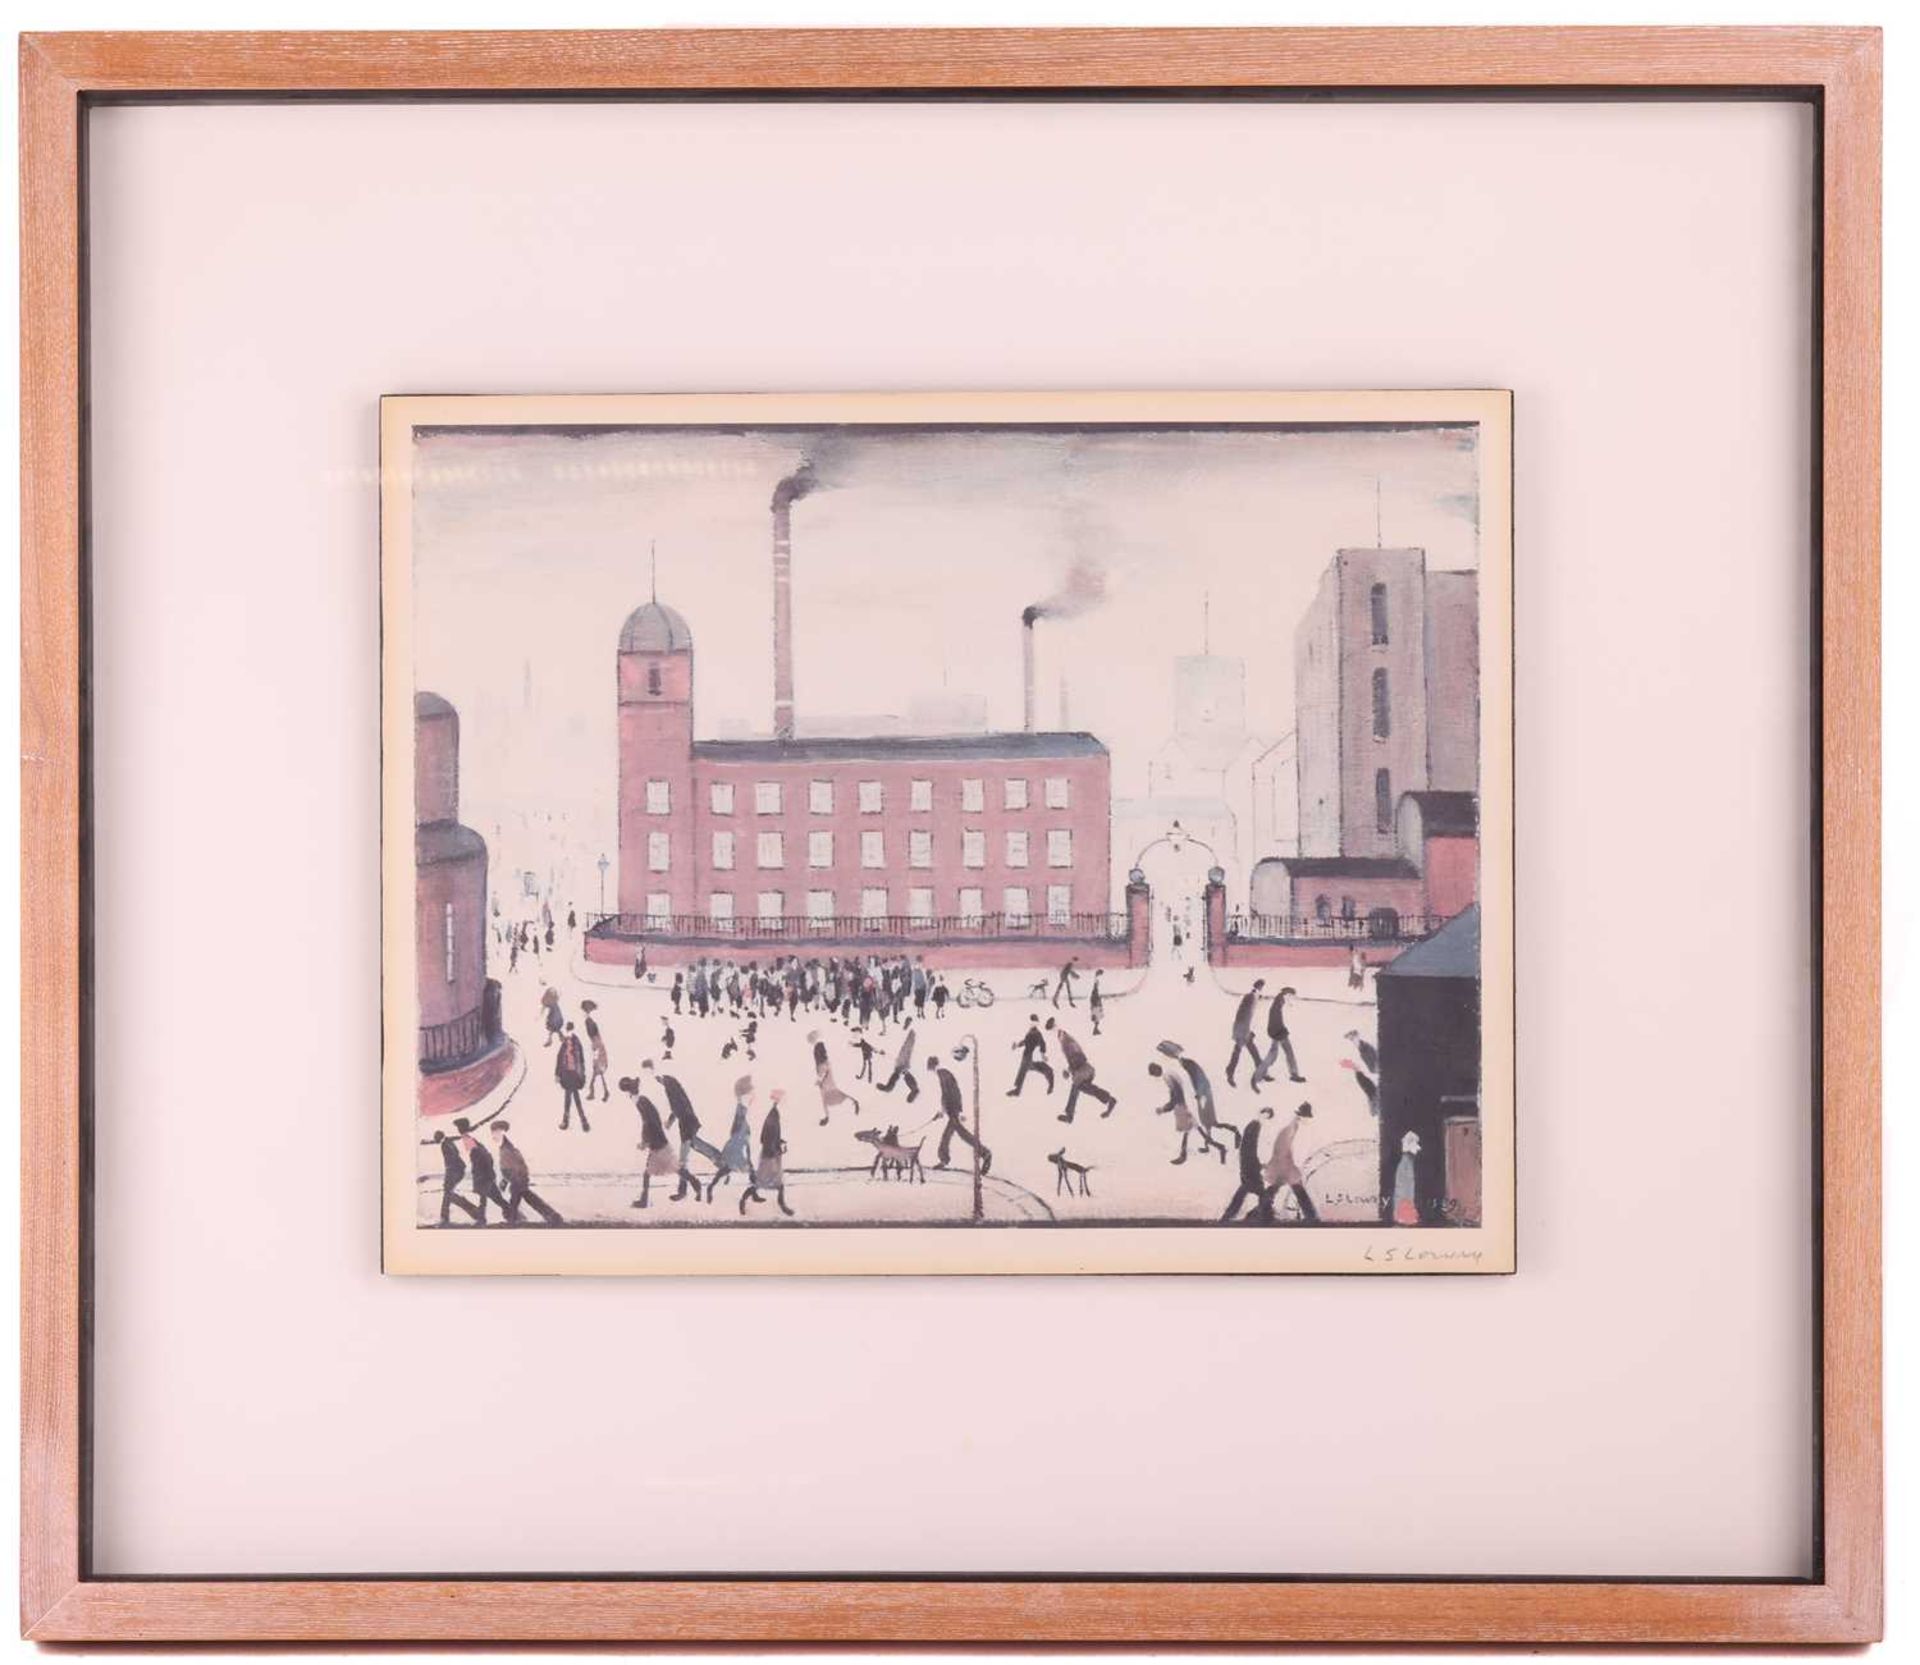 Laurence Stephen Lowry (1887-1976), 'Mill Scene', offset lithograph on paper, from an edition of 750 - Image 2 of 7